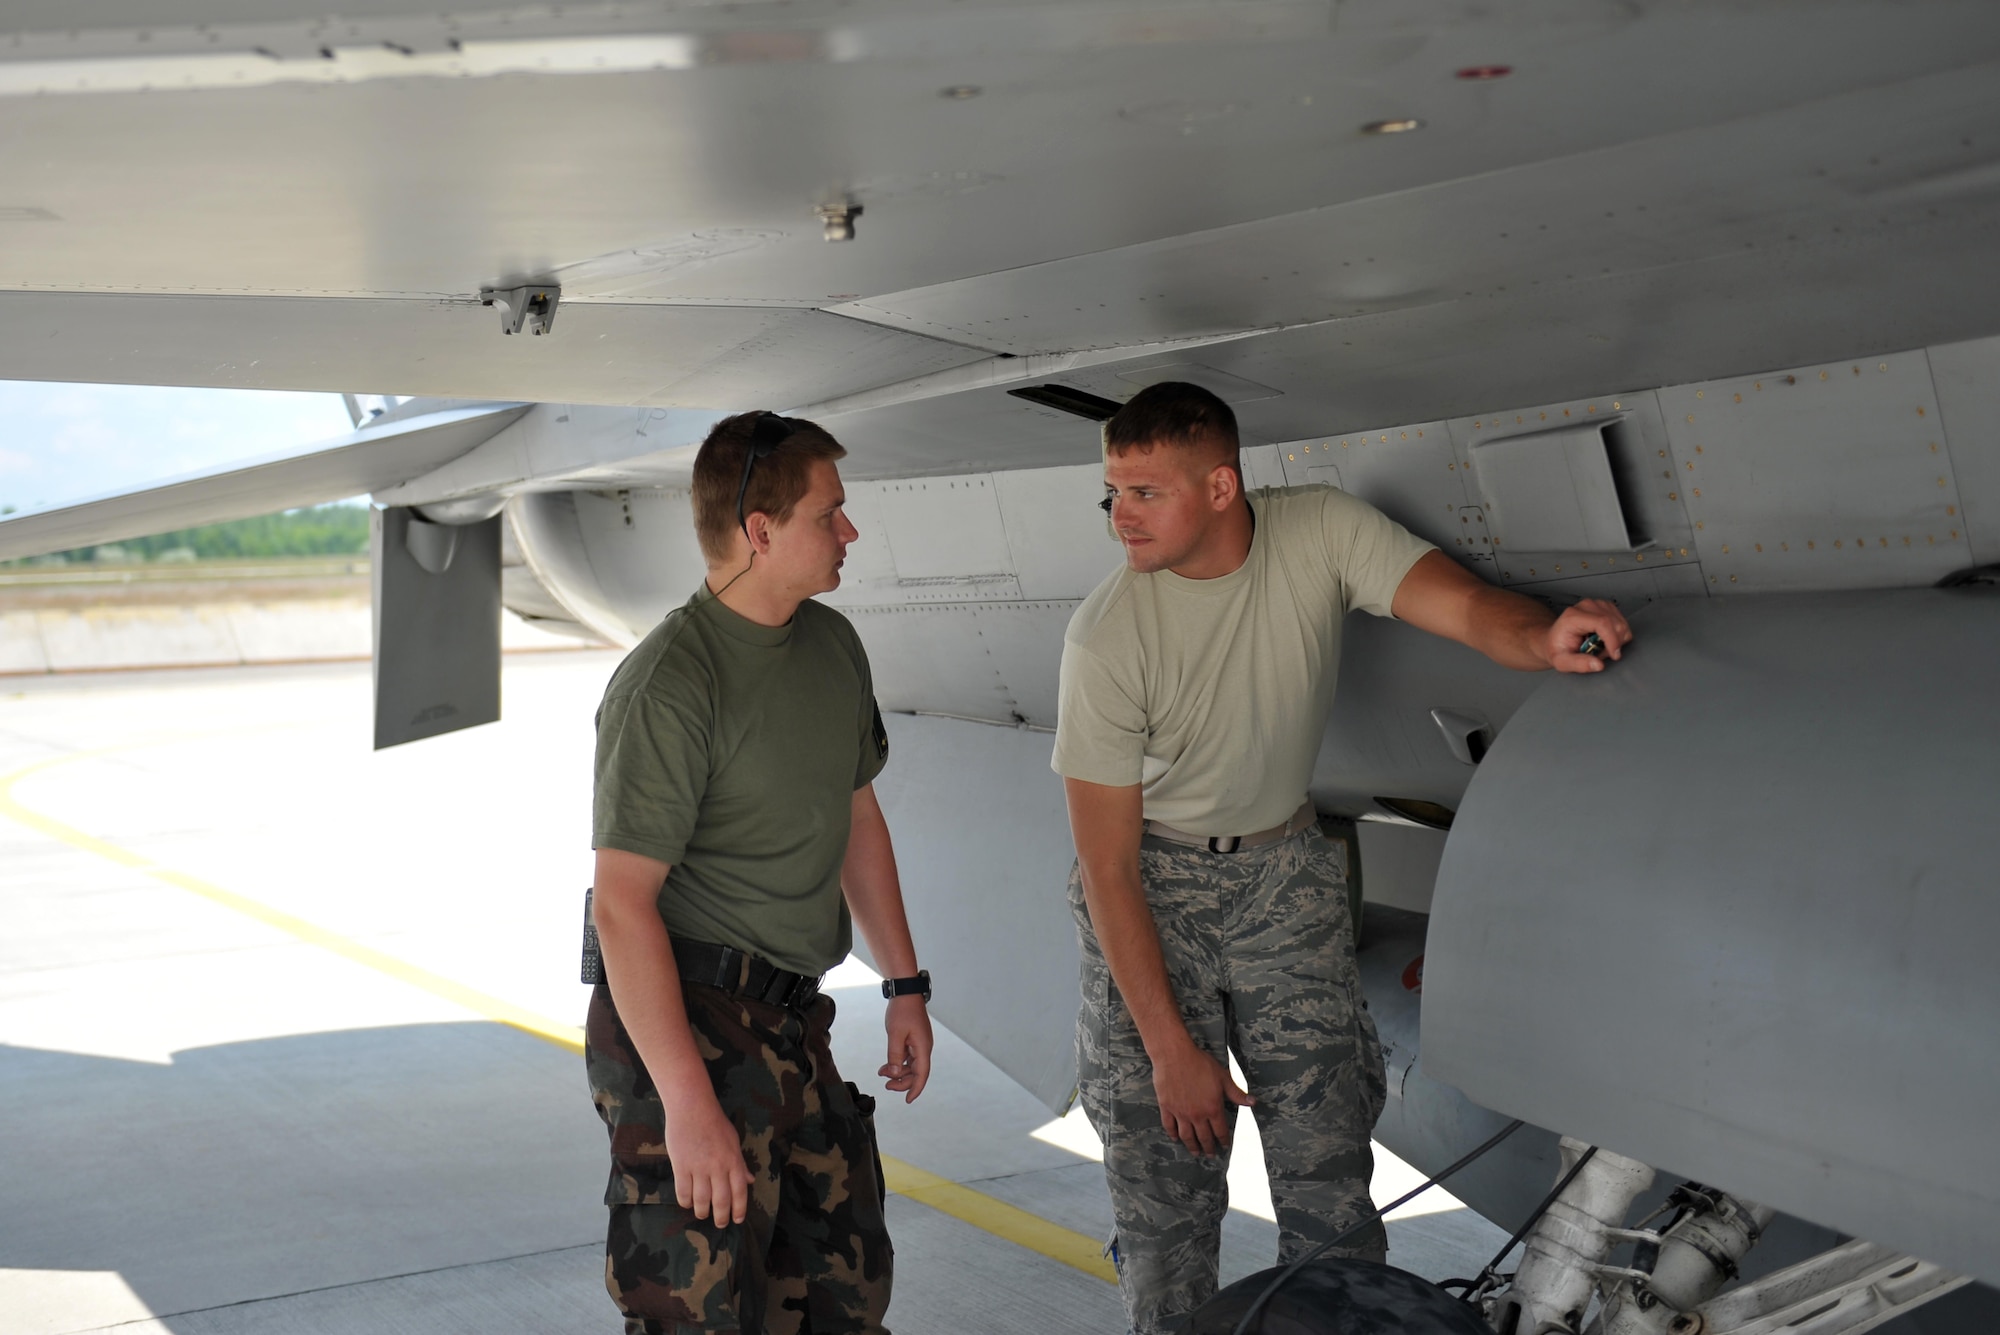 Airman First Class Damon St. John, an F-16 Fighting Falcon mechanic, teaches 1 Lt. Laszlo Molnar, a JAS 39 Grippen mechanical engineer assigned to the Hungarian Air Force, to launch an F-16 Fighting Falcon assigned to the 180th Fighter Wing, Ohio Air National Guard May 26, 2017 at Kecskemet Air Base in Hungary. The United States, along with Hungary, Slovakia, Croatia, Czech Republic and Slovenia, participated in Load Diffuser 17, a two-week Hungarian-led multinational exercise focused on enhancing interoperability capabilities and skills among NATO allied and European partner air forces by conducting joint operations and air defenses to maintain joint readiness, while also bolstering relationships within the U.S. Air National Guard’s State Partnership Program initiatives. Ohio became state partners with Hungary in 1993. Air National Guard photo by Senior Master Sgt. Beth Holliker.